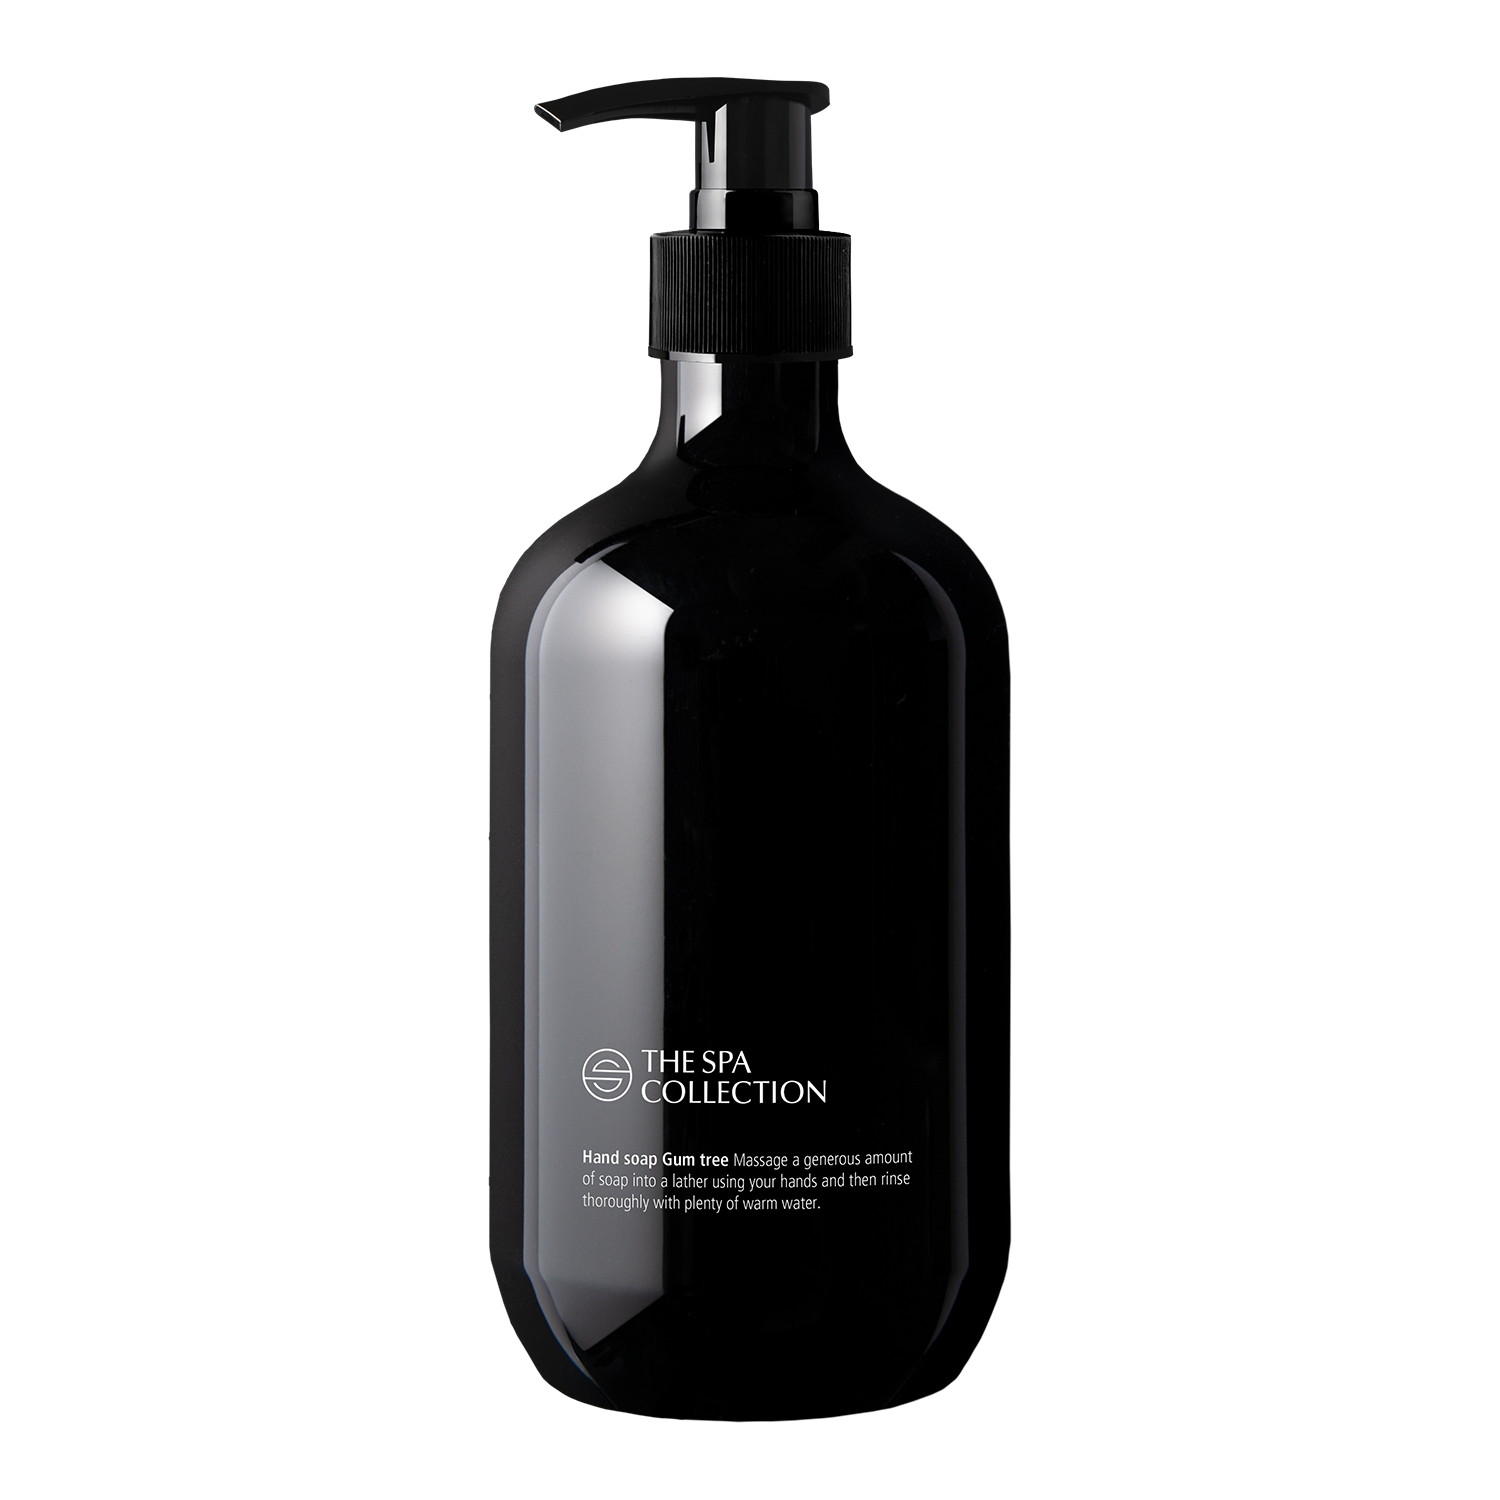 Hand soap - 475ml recycled bottle - The Spa Collection Gum Tree